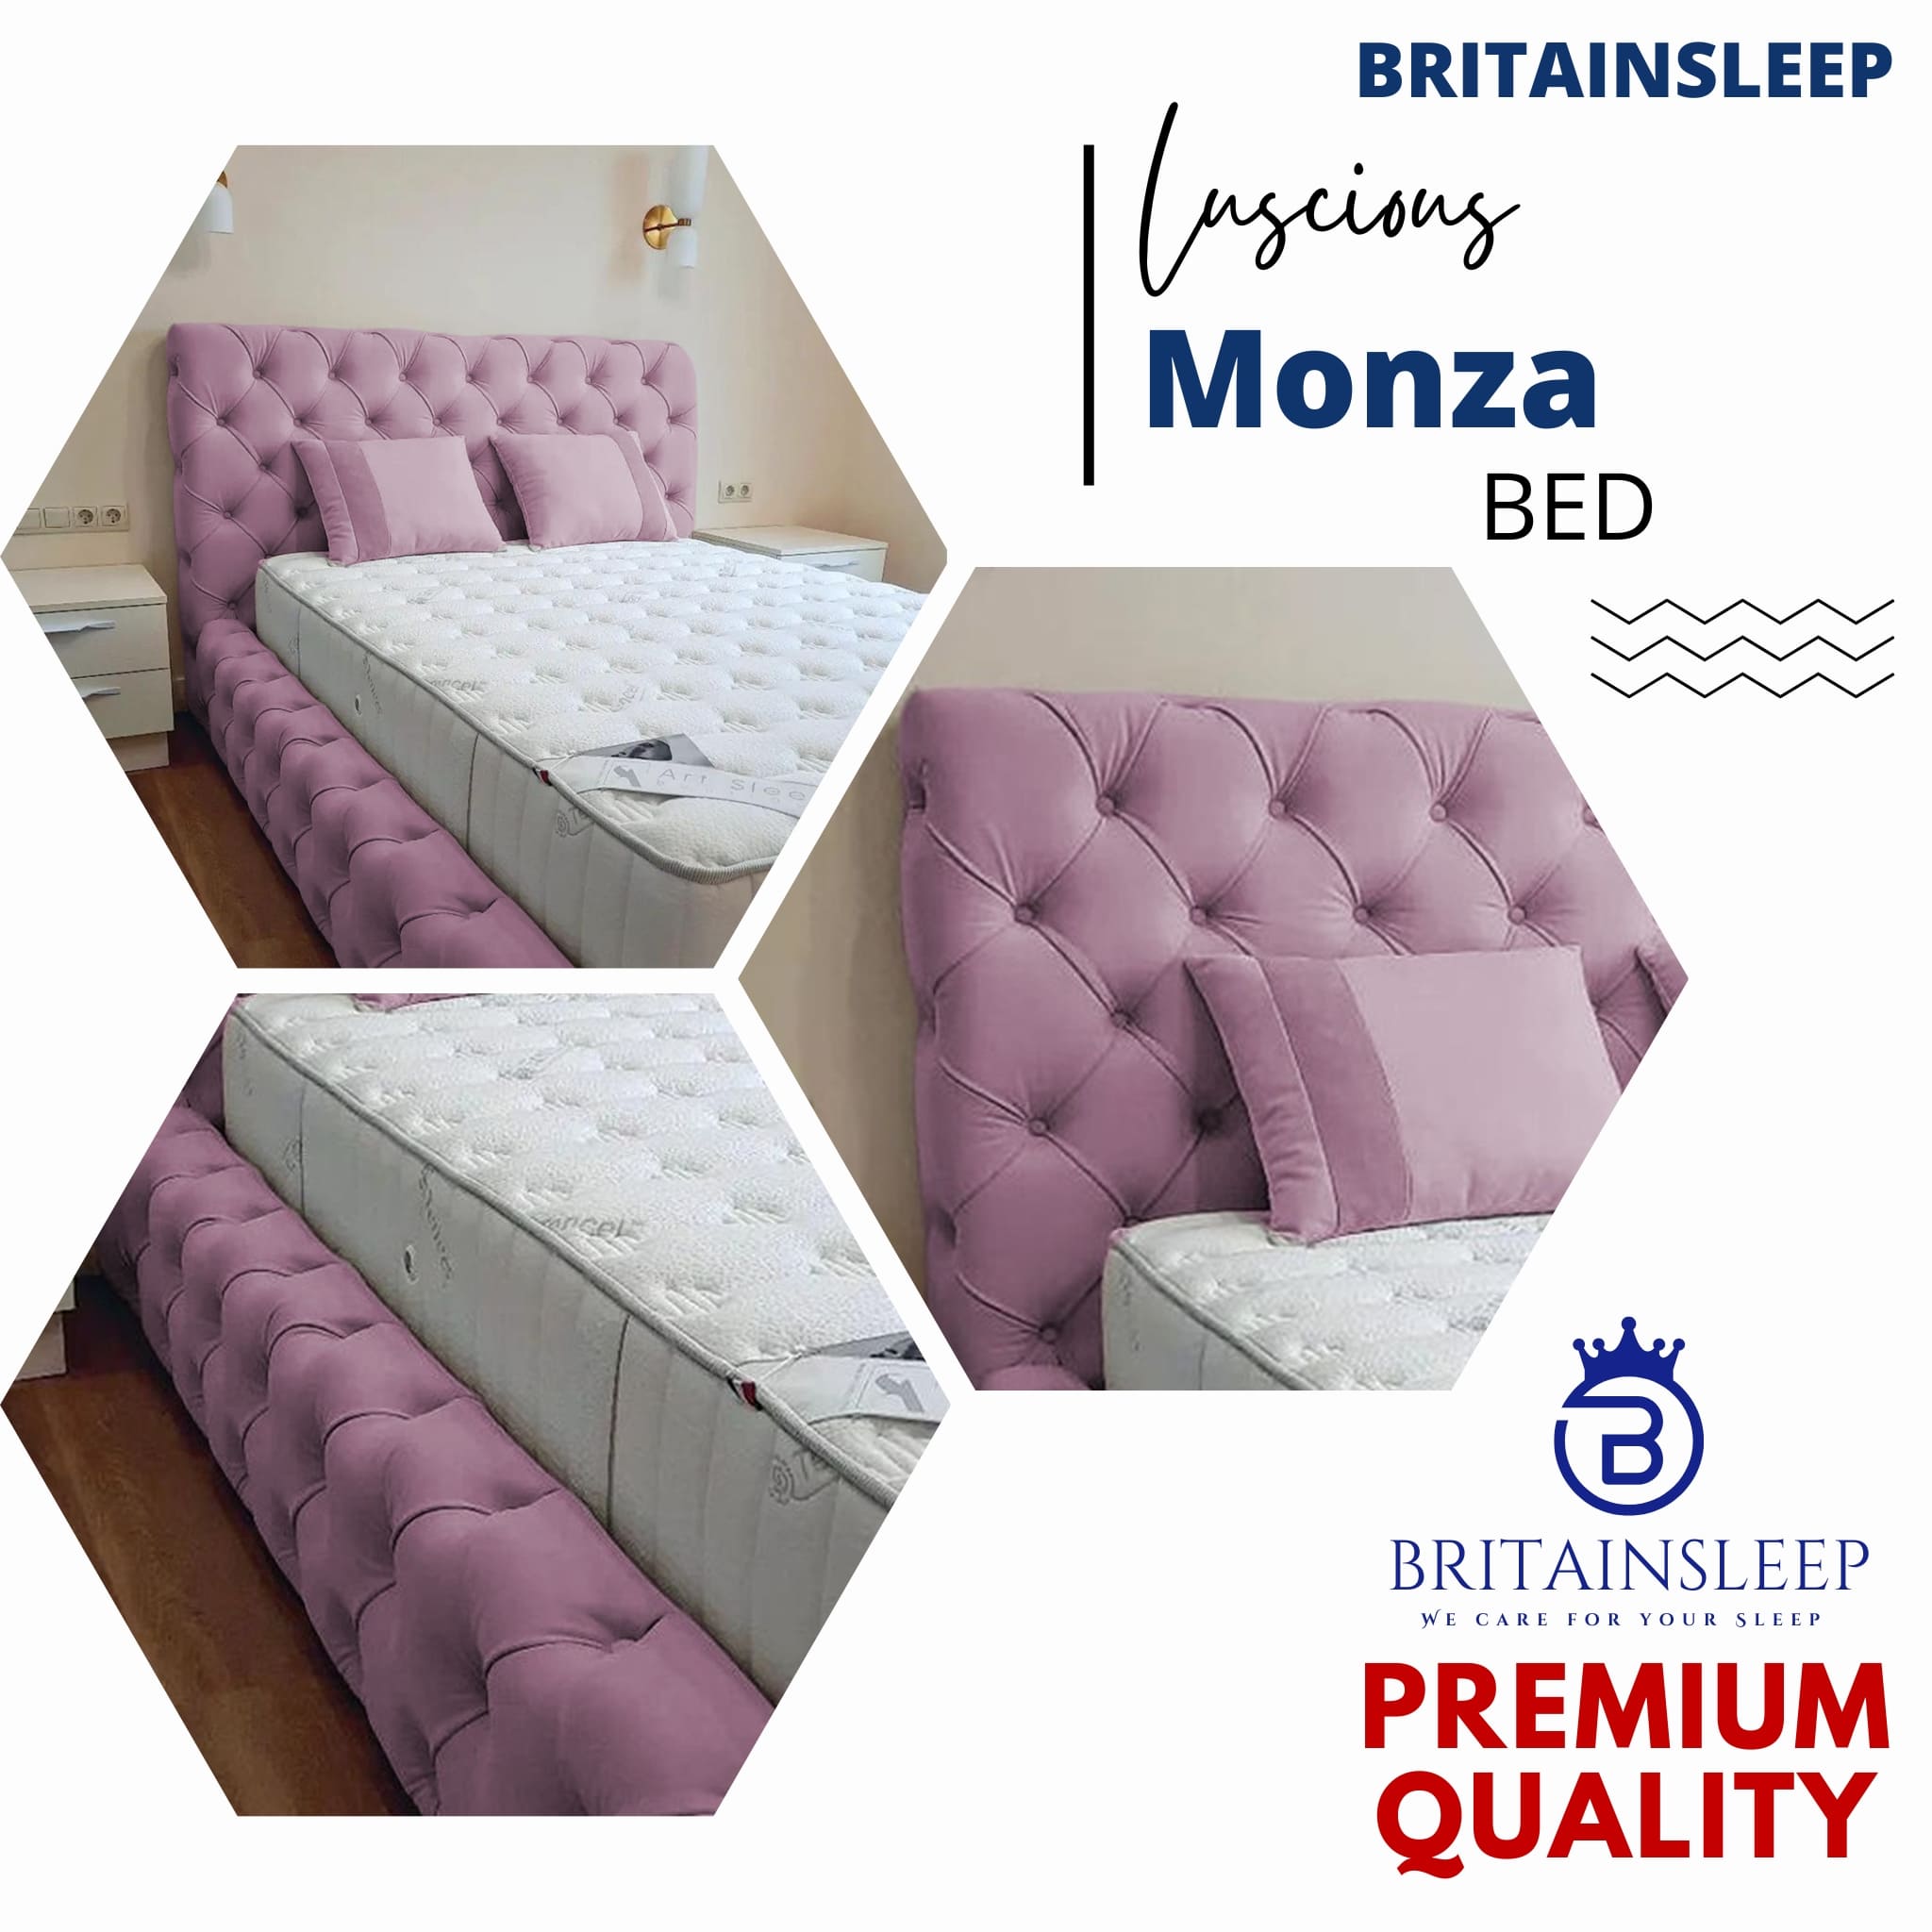 Luxury 50'' Monza Upholstered Ottoman Storage Bed Frame | Double | Single | Small Double | KingSize | Super King Size Bed Britainsleep